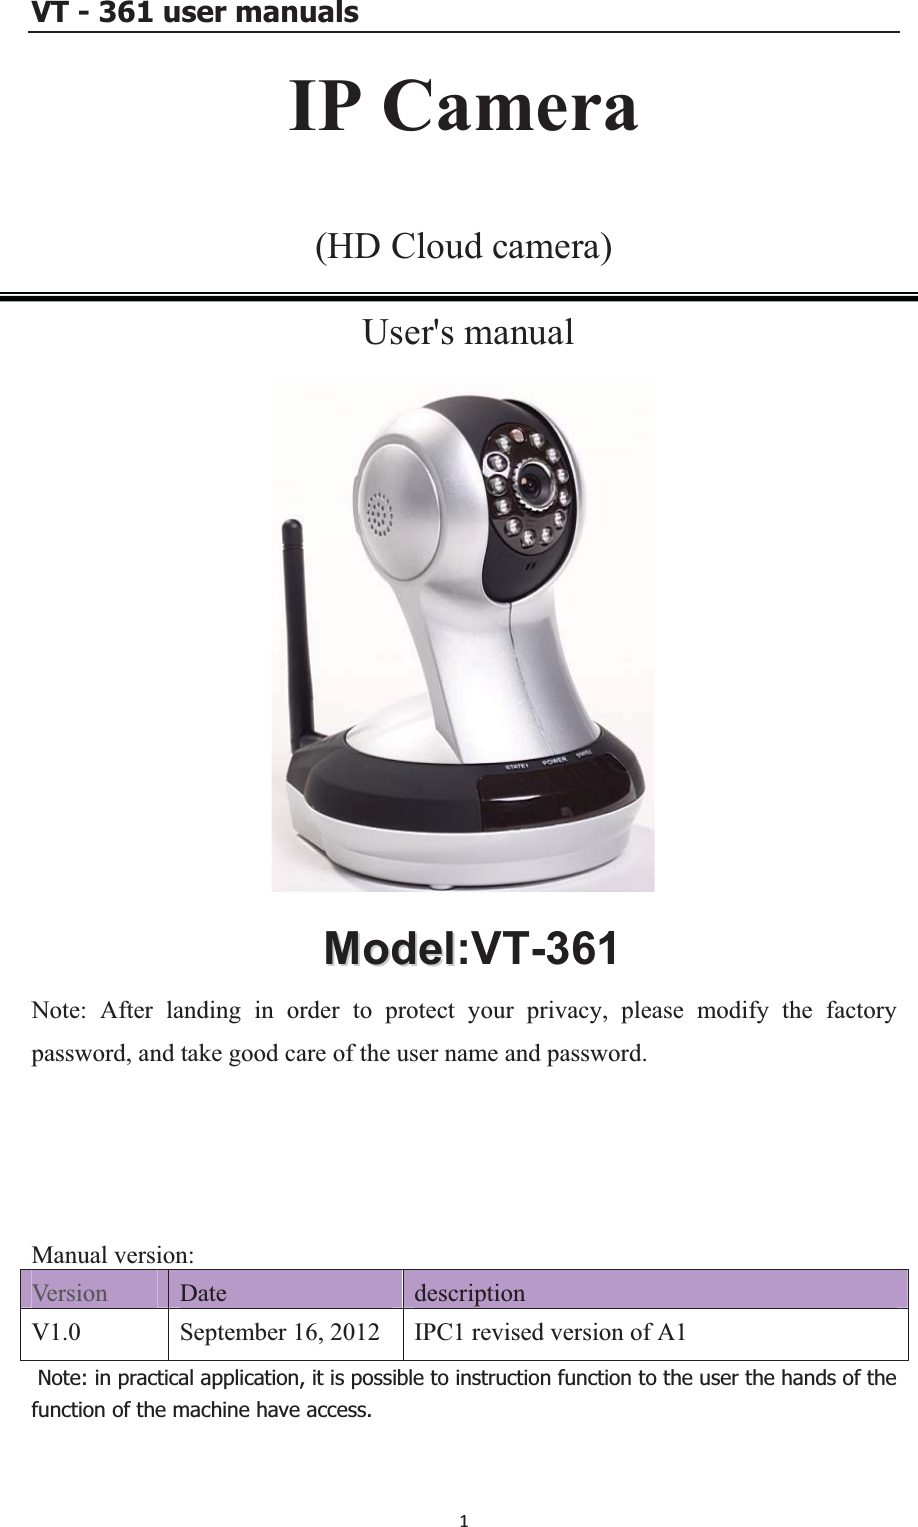 VT - 361 user manualsIP Camera(HD Cloud camera)  User&apos;s manual MMooddeell:VT-361Note: After landing in order to protect your privacy, please modify the factory password, and take good care of the user name and password. Manual version: Version Date description V1.0 September 16, 2012  IPC1 revised version of A1 Note: in practical application, it is possible to instruction function to the user the hands of the function of the machine have access. 1